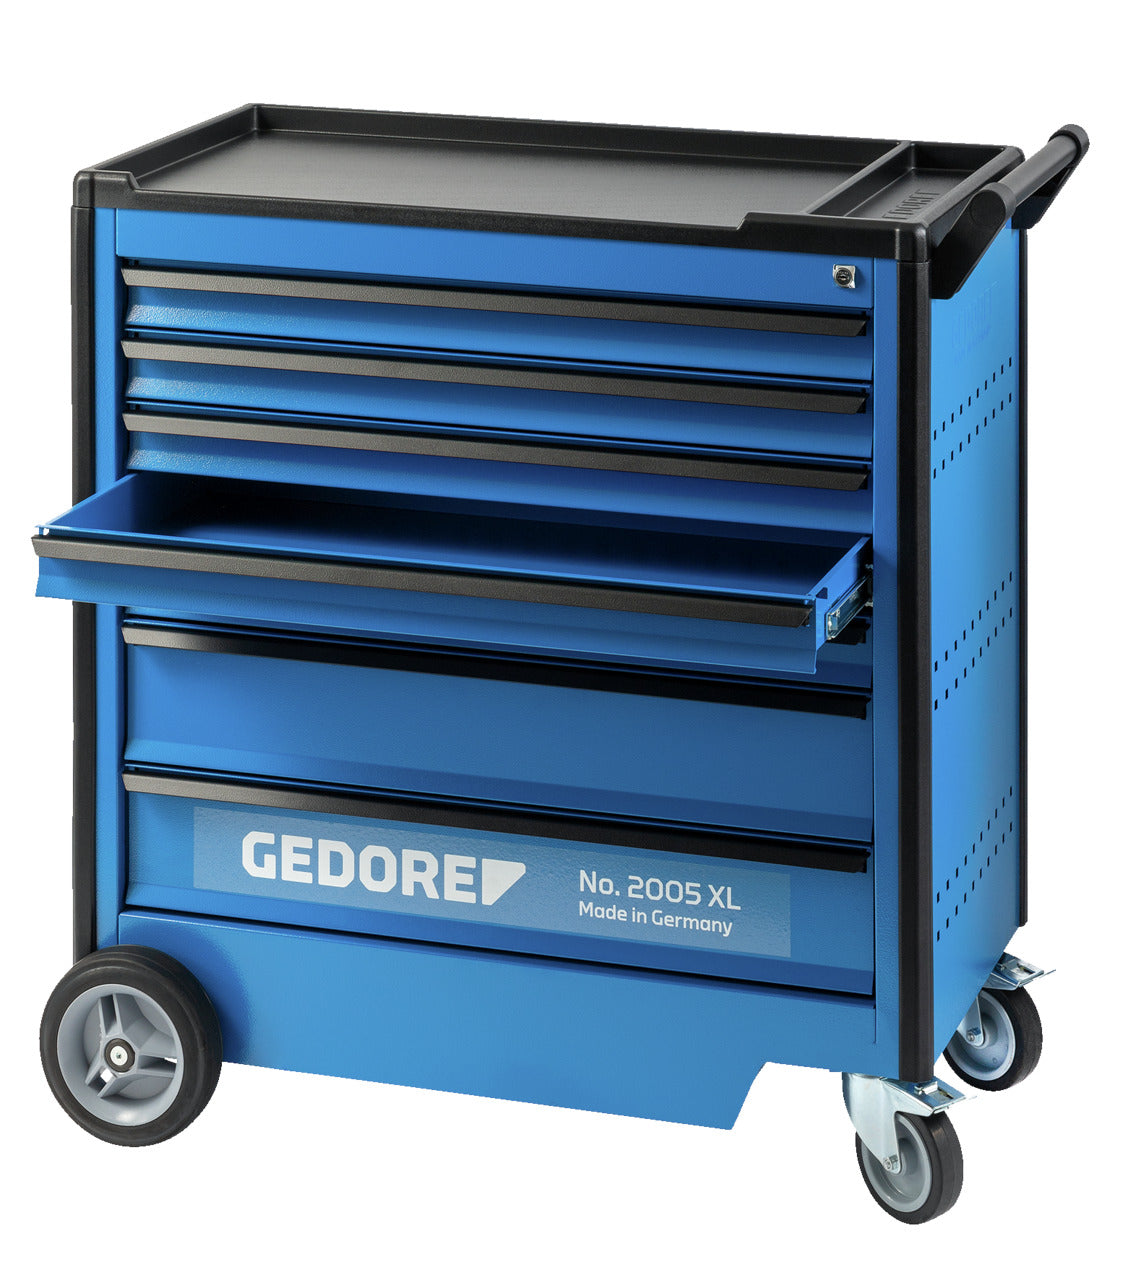 GEDORE 2005 XL 0520 - XL Tool Cart with 7 Drawers (3437493)